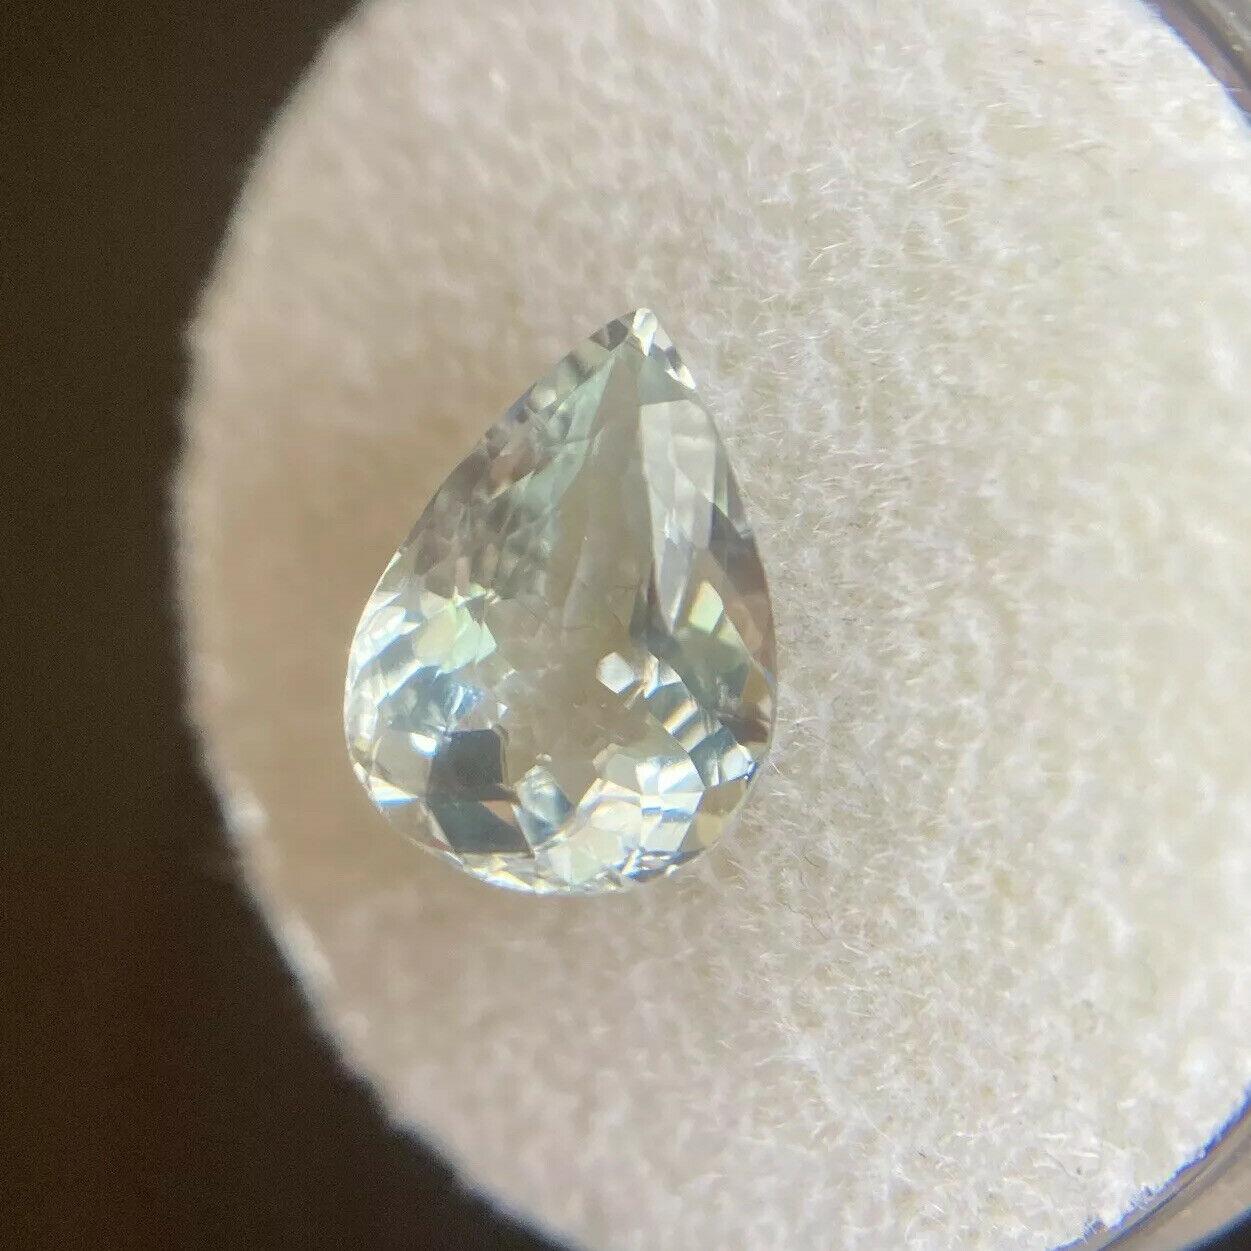 Natural Blue Aquamarine 1.91ct Pear Cut Loose Beryl Gem 10.5 x 7.5mm

Natural Blue Aquamarine Gemstone. 
1.91 carat stone with bright blue colour and very good clarity, some small natural inclusions visible when looking closely but still a clean